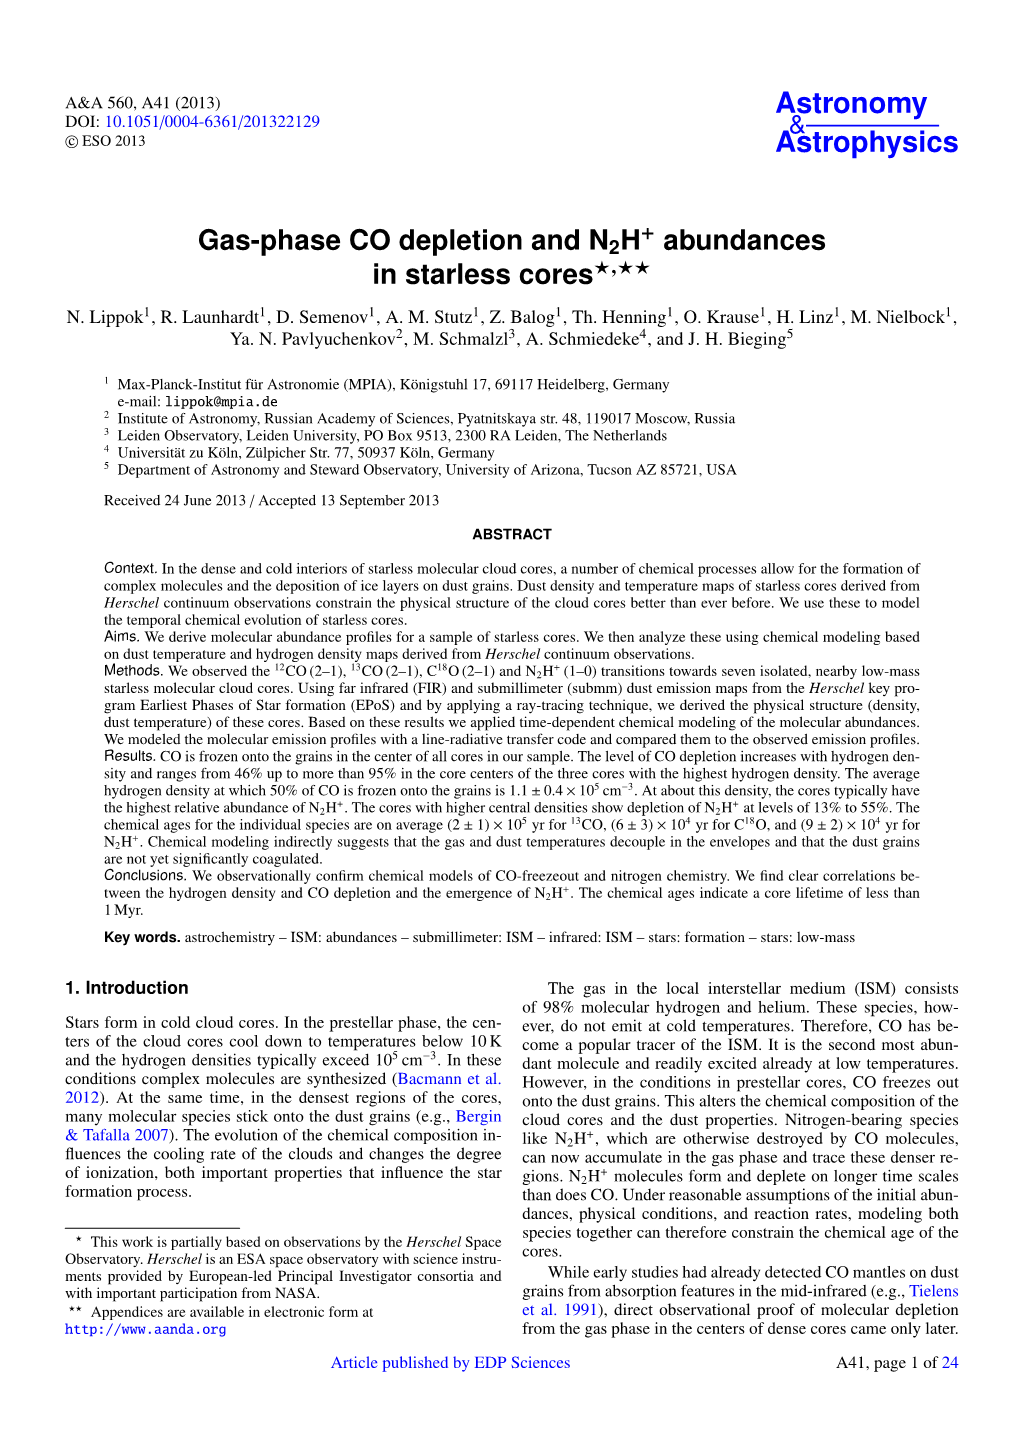 Gas-Phase CO Depletion and N2H+ Abundances in Starless Cores⋆⋆⋆